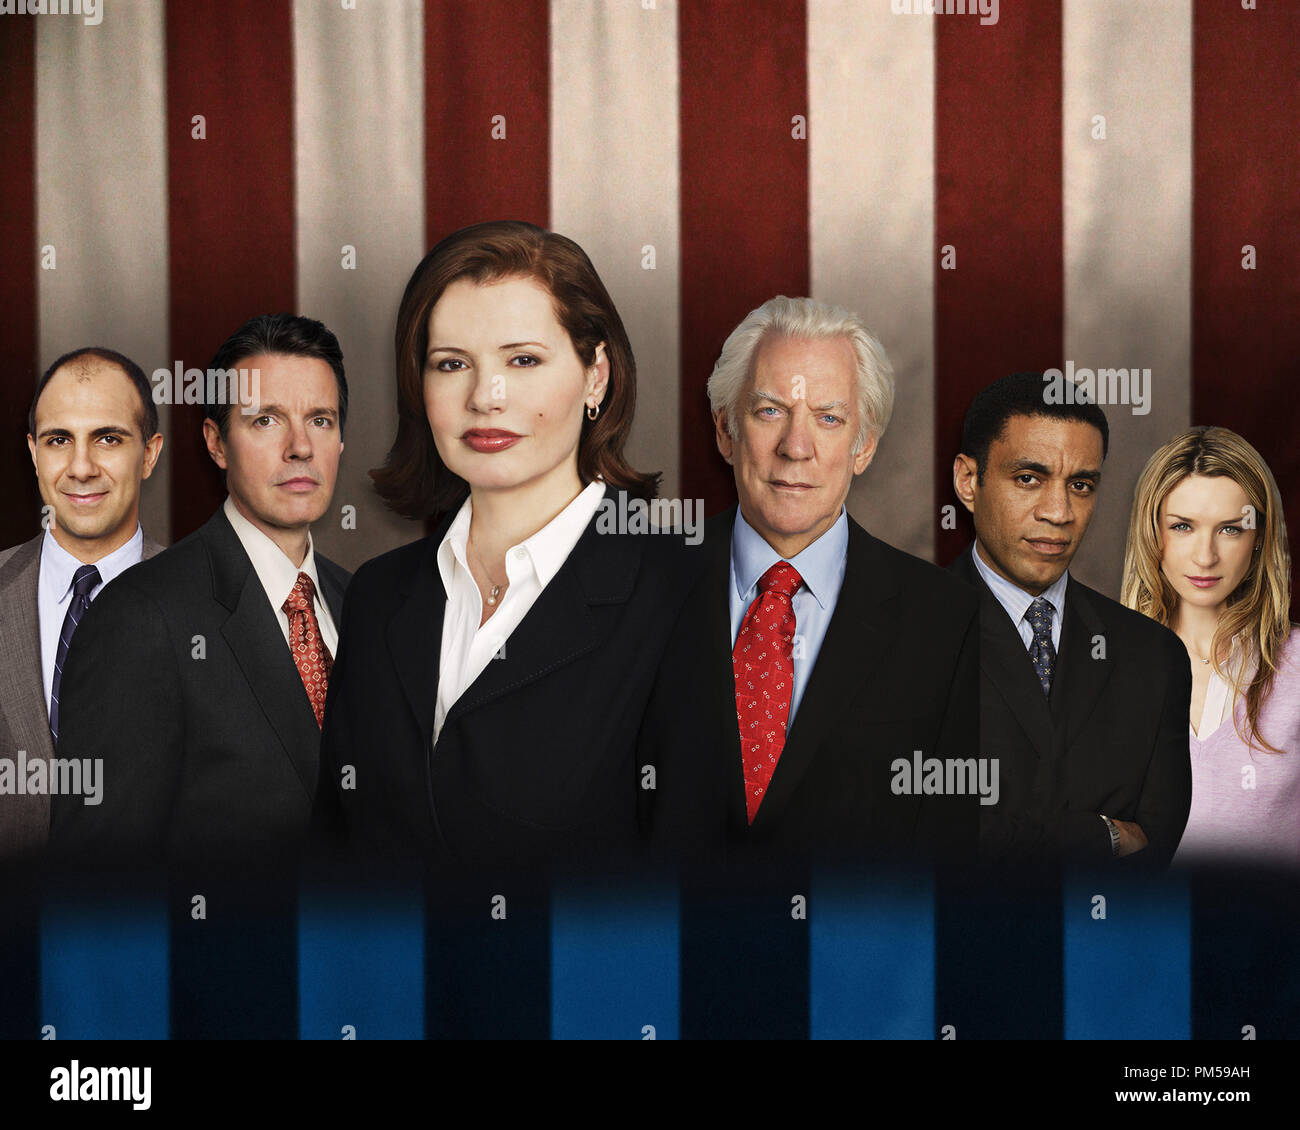 Studio Publicity Still from 'Commander in Chief' Anthony Azizi, Kyle Secor, Geena Davis, Donald Sutherland, Harry J. Lennix, Ever Carradine 2005 Photo by Bob D'Amico   File Reference # 307362254THA  For Editorial Use Only -  All Rights Reserved Stock Photo